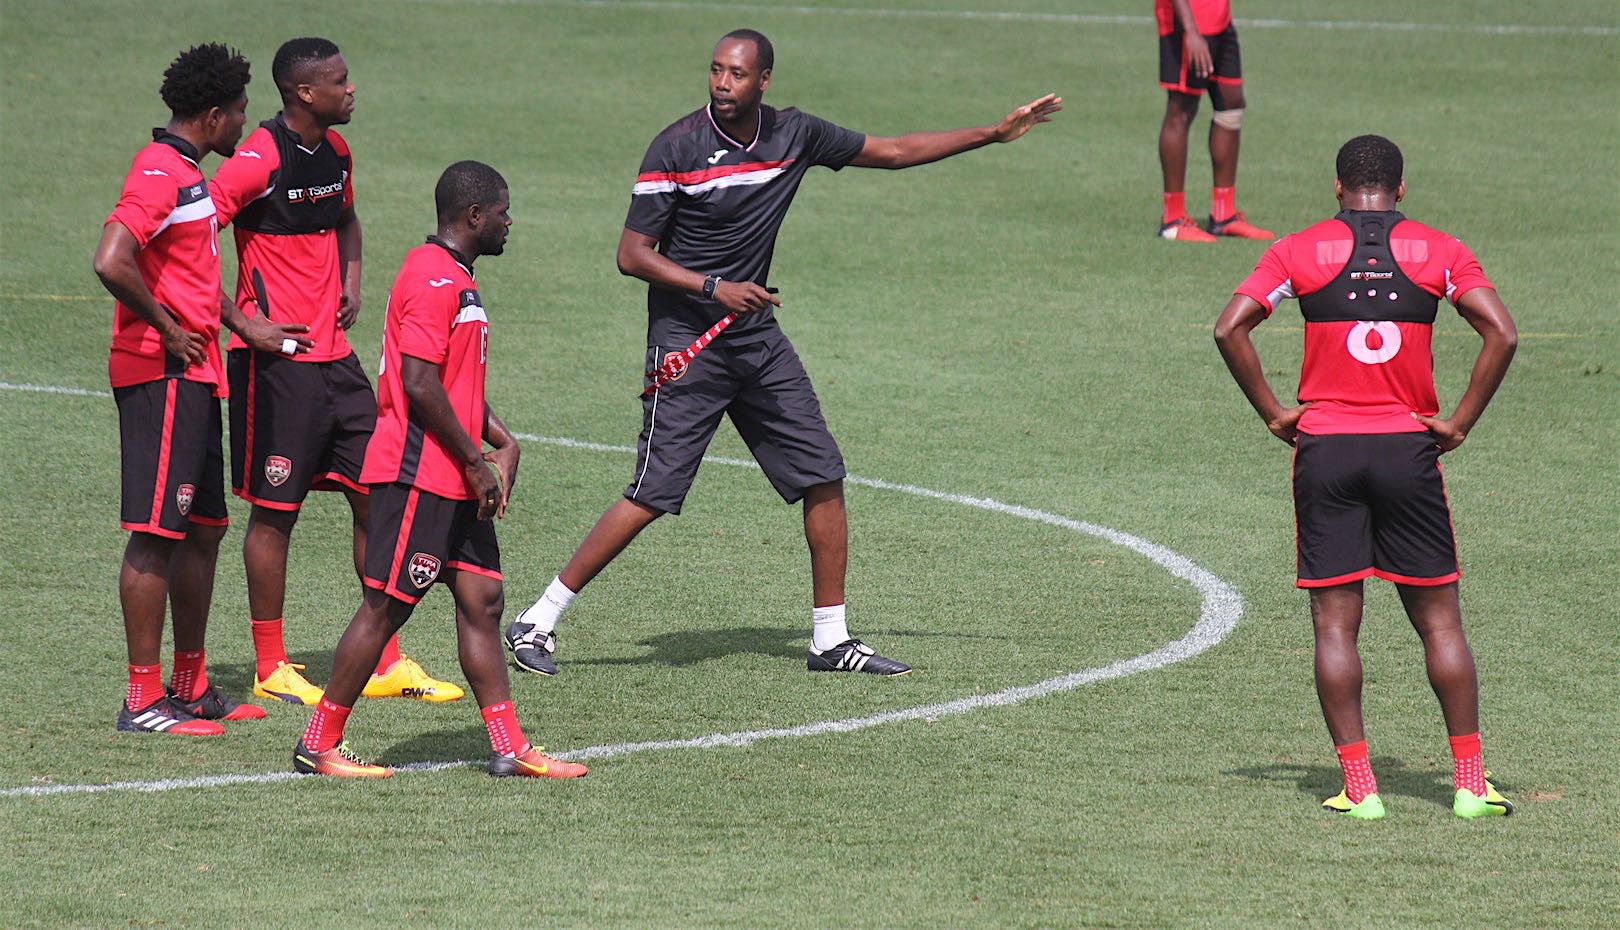 T&T's men stay focused ahead of Gold Cup opener.